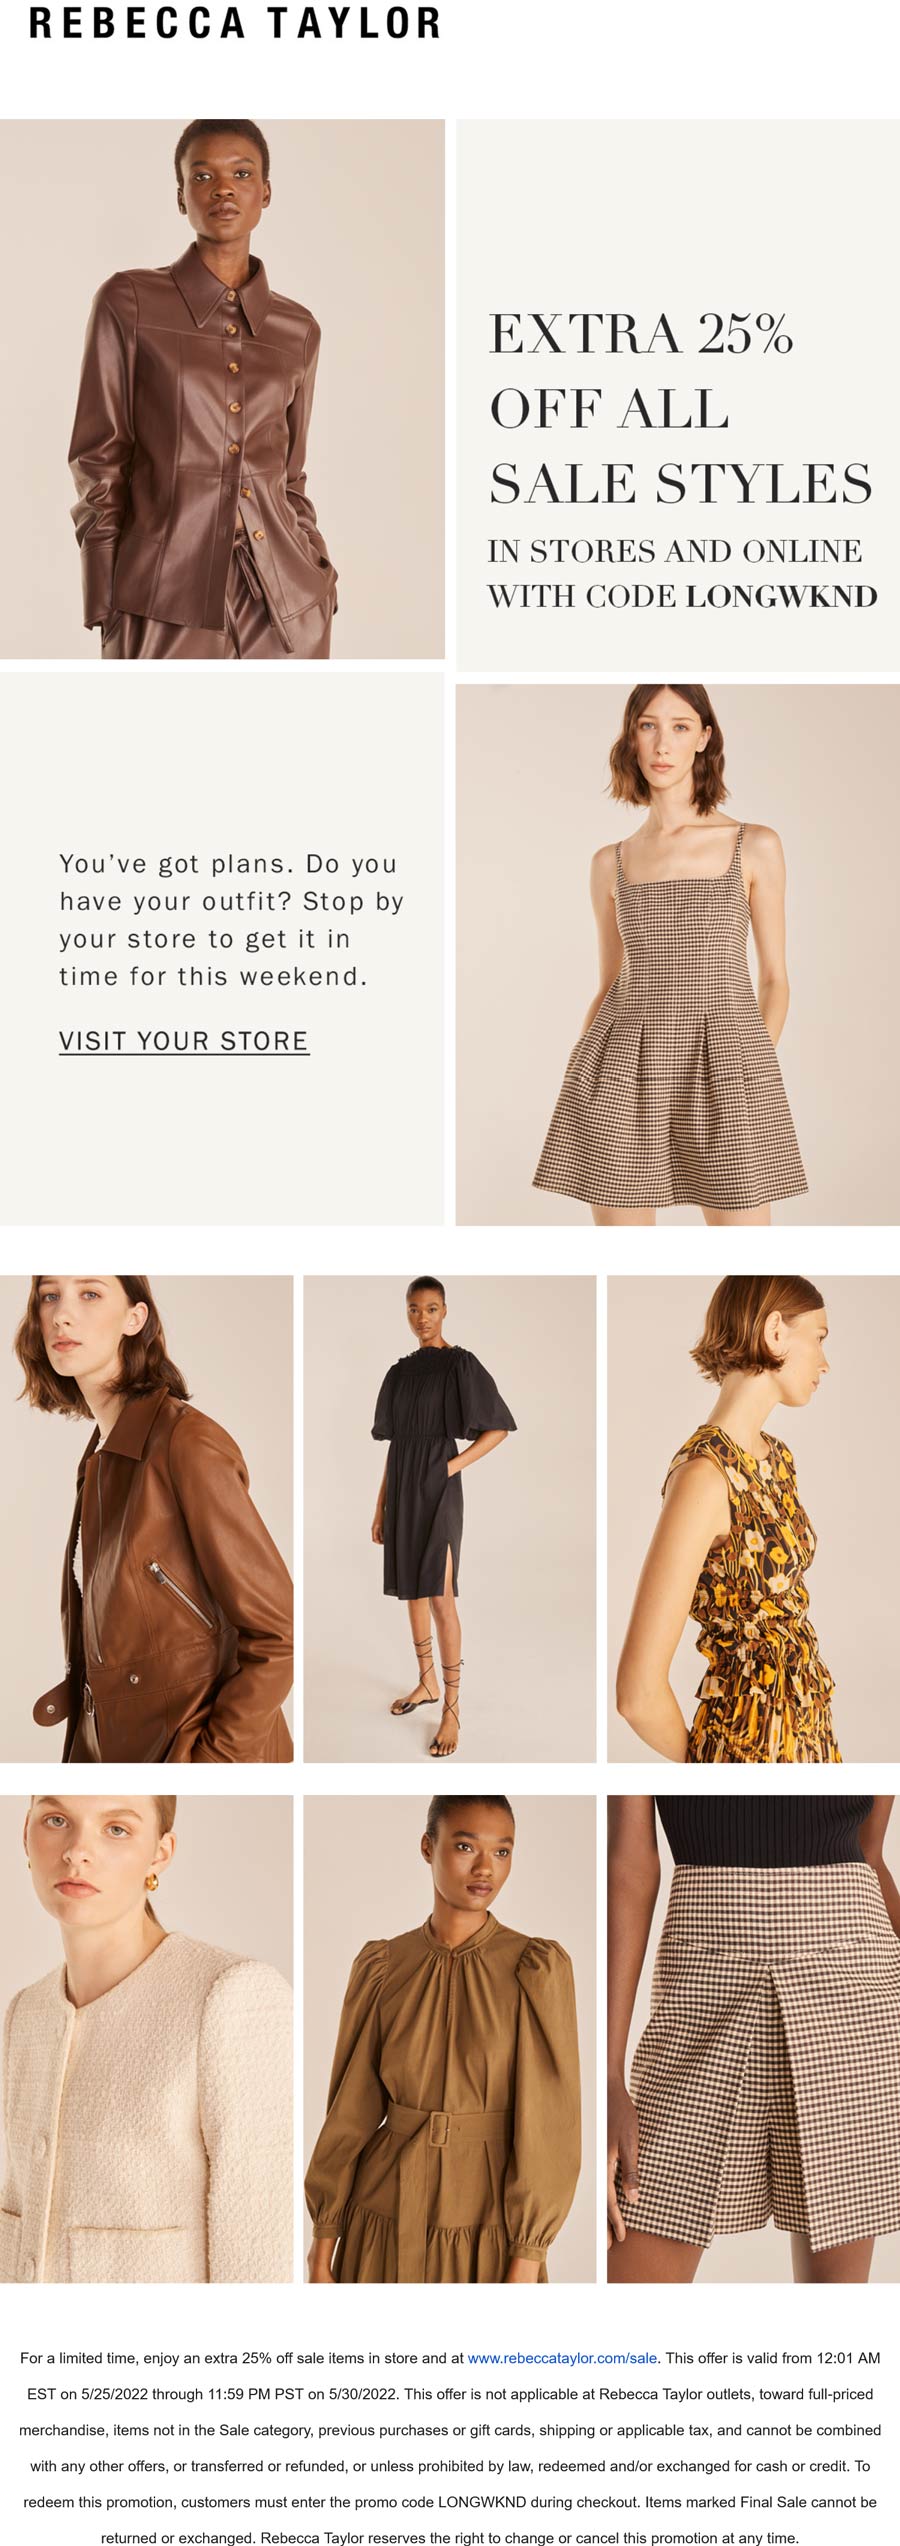 Rebecca Taylor stores Coupon  Extra 25% off sale styles at Rebecca Taylor, or online via promo code LONGWKND #rebeccataylor 